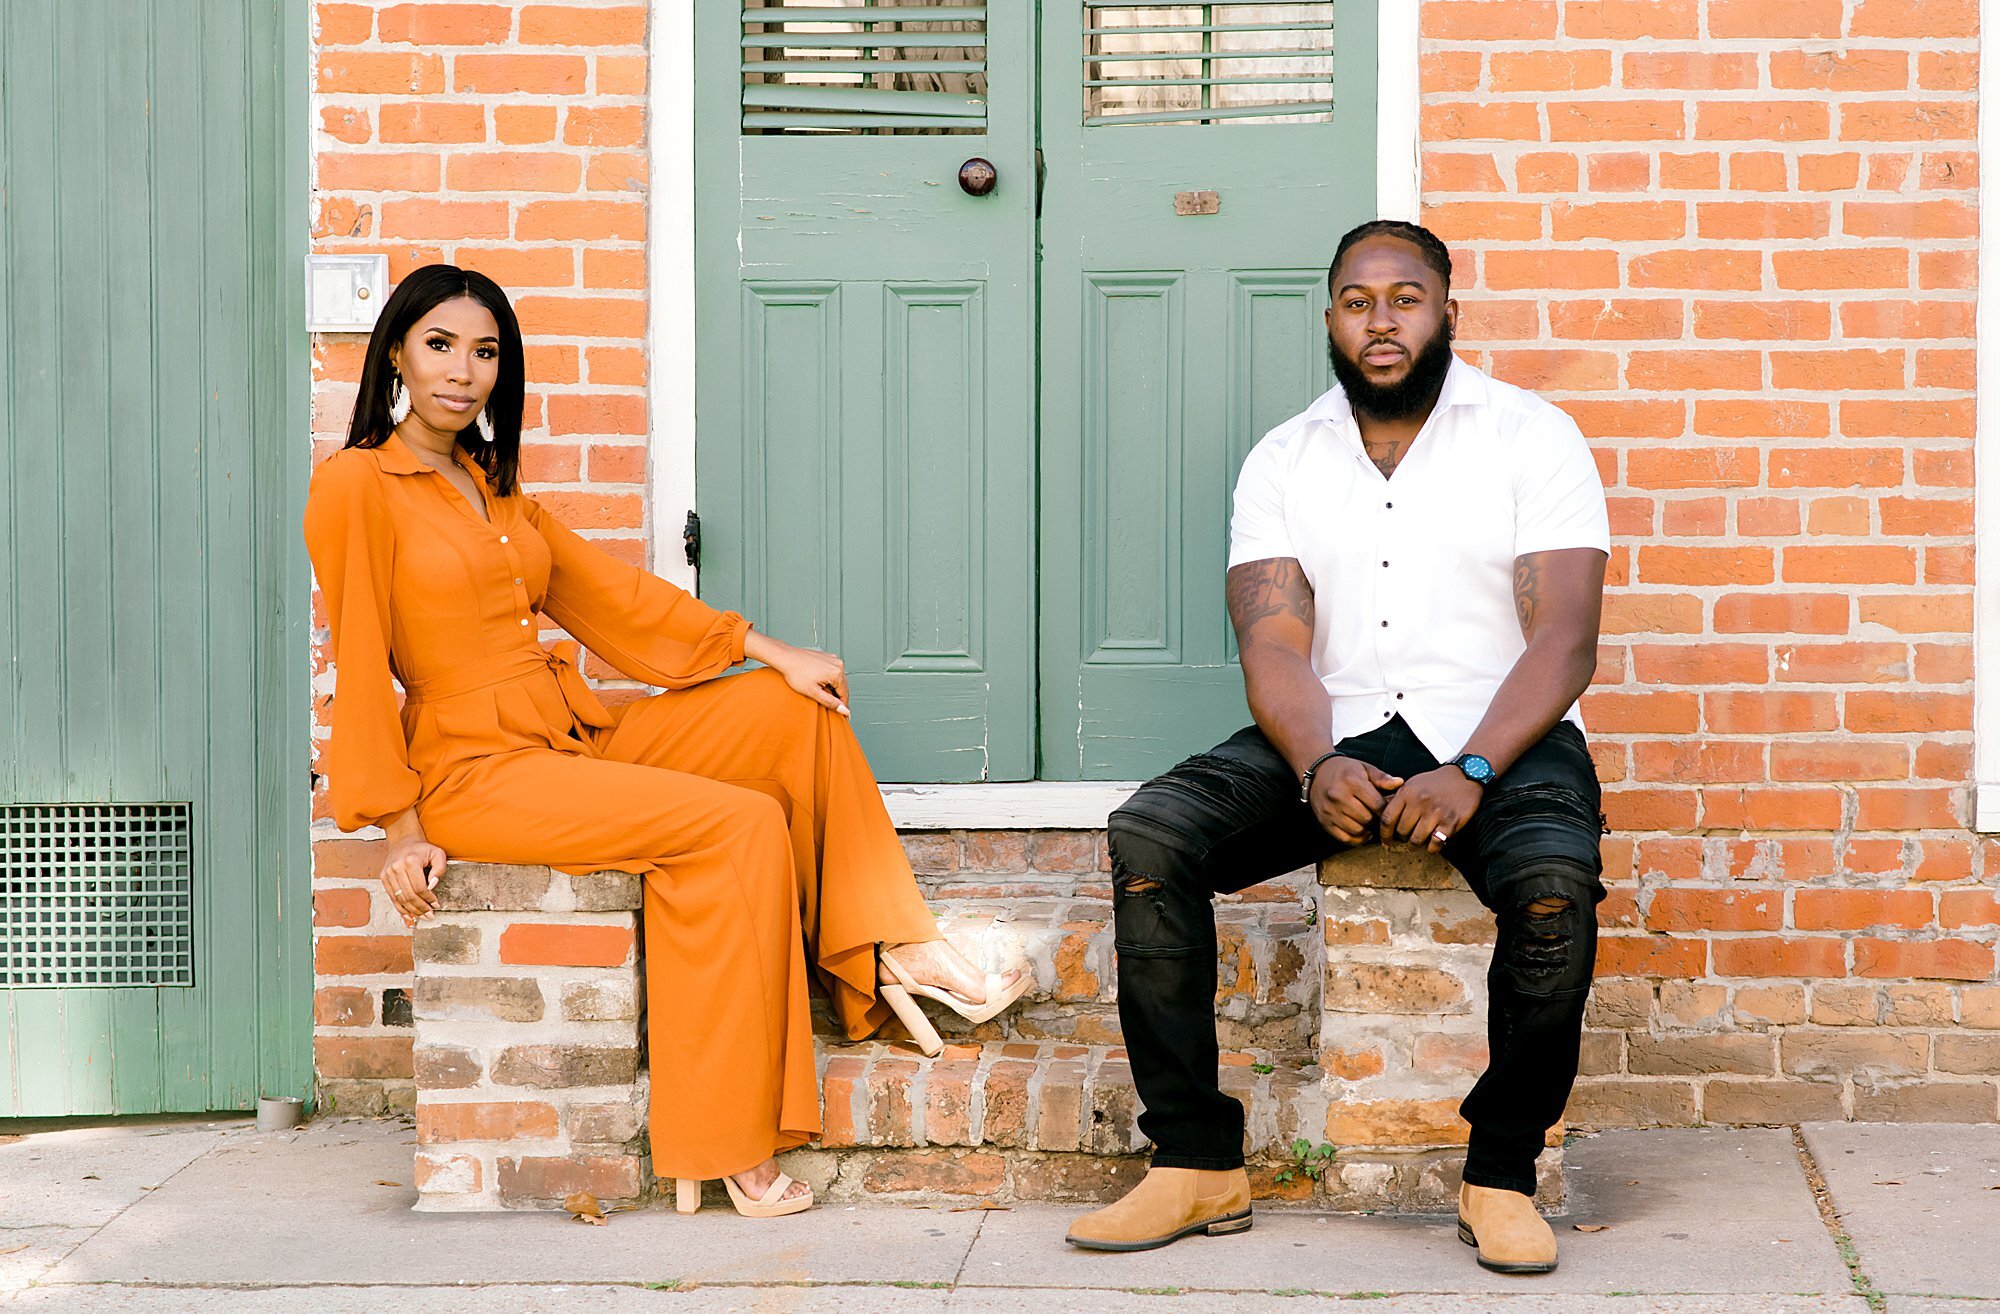 French Quarter Engagement Shoot-New Orleans French Quarter-New Orleans Photographer_0127.jpg